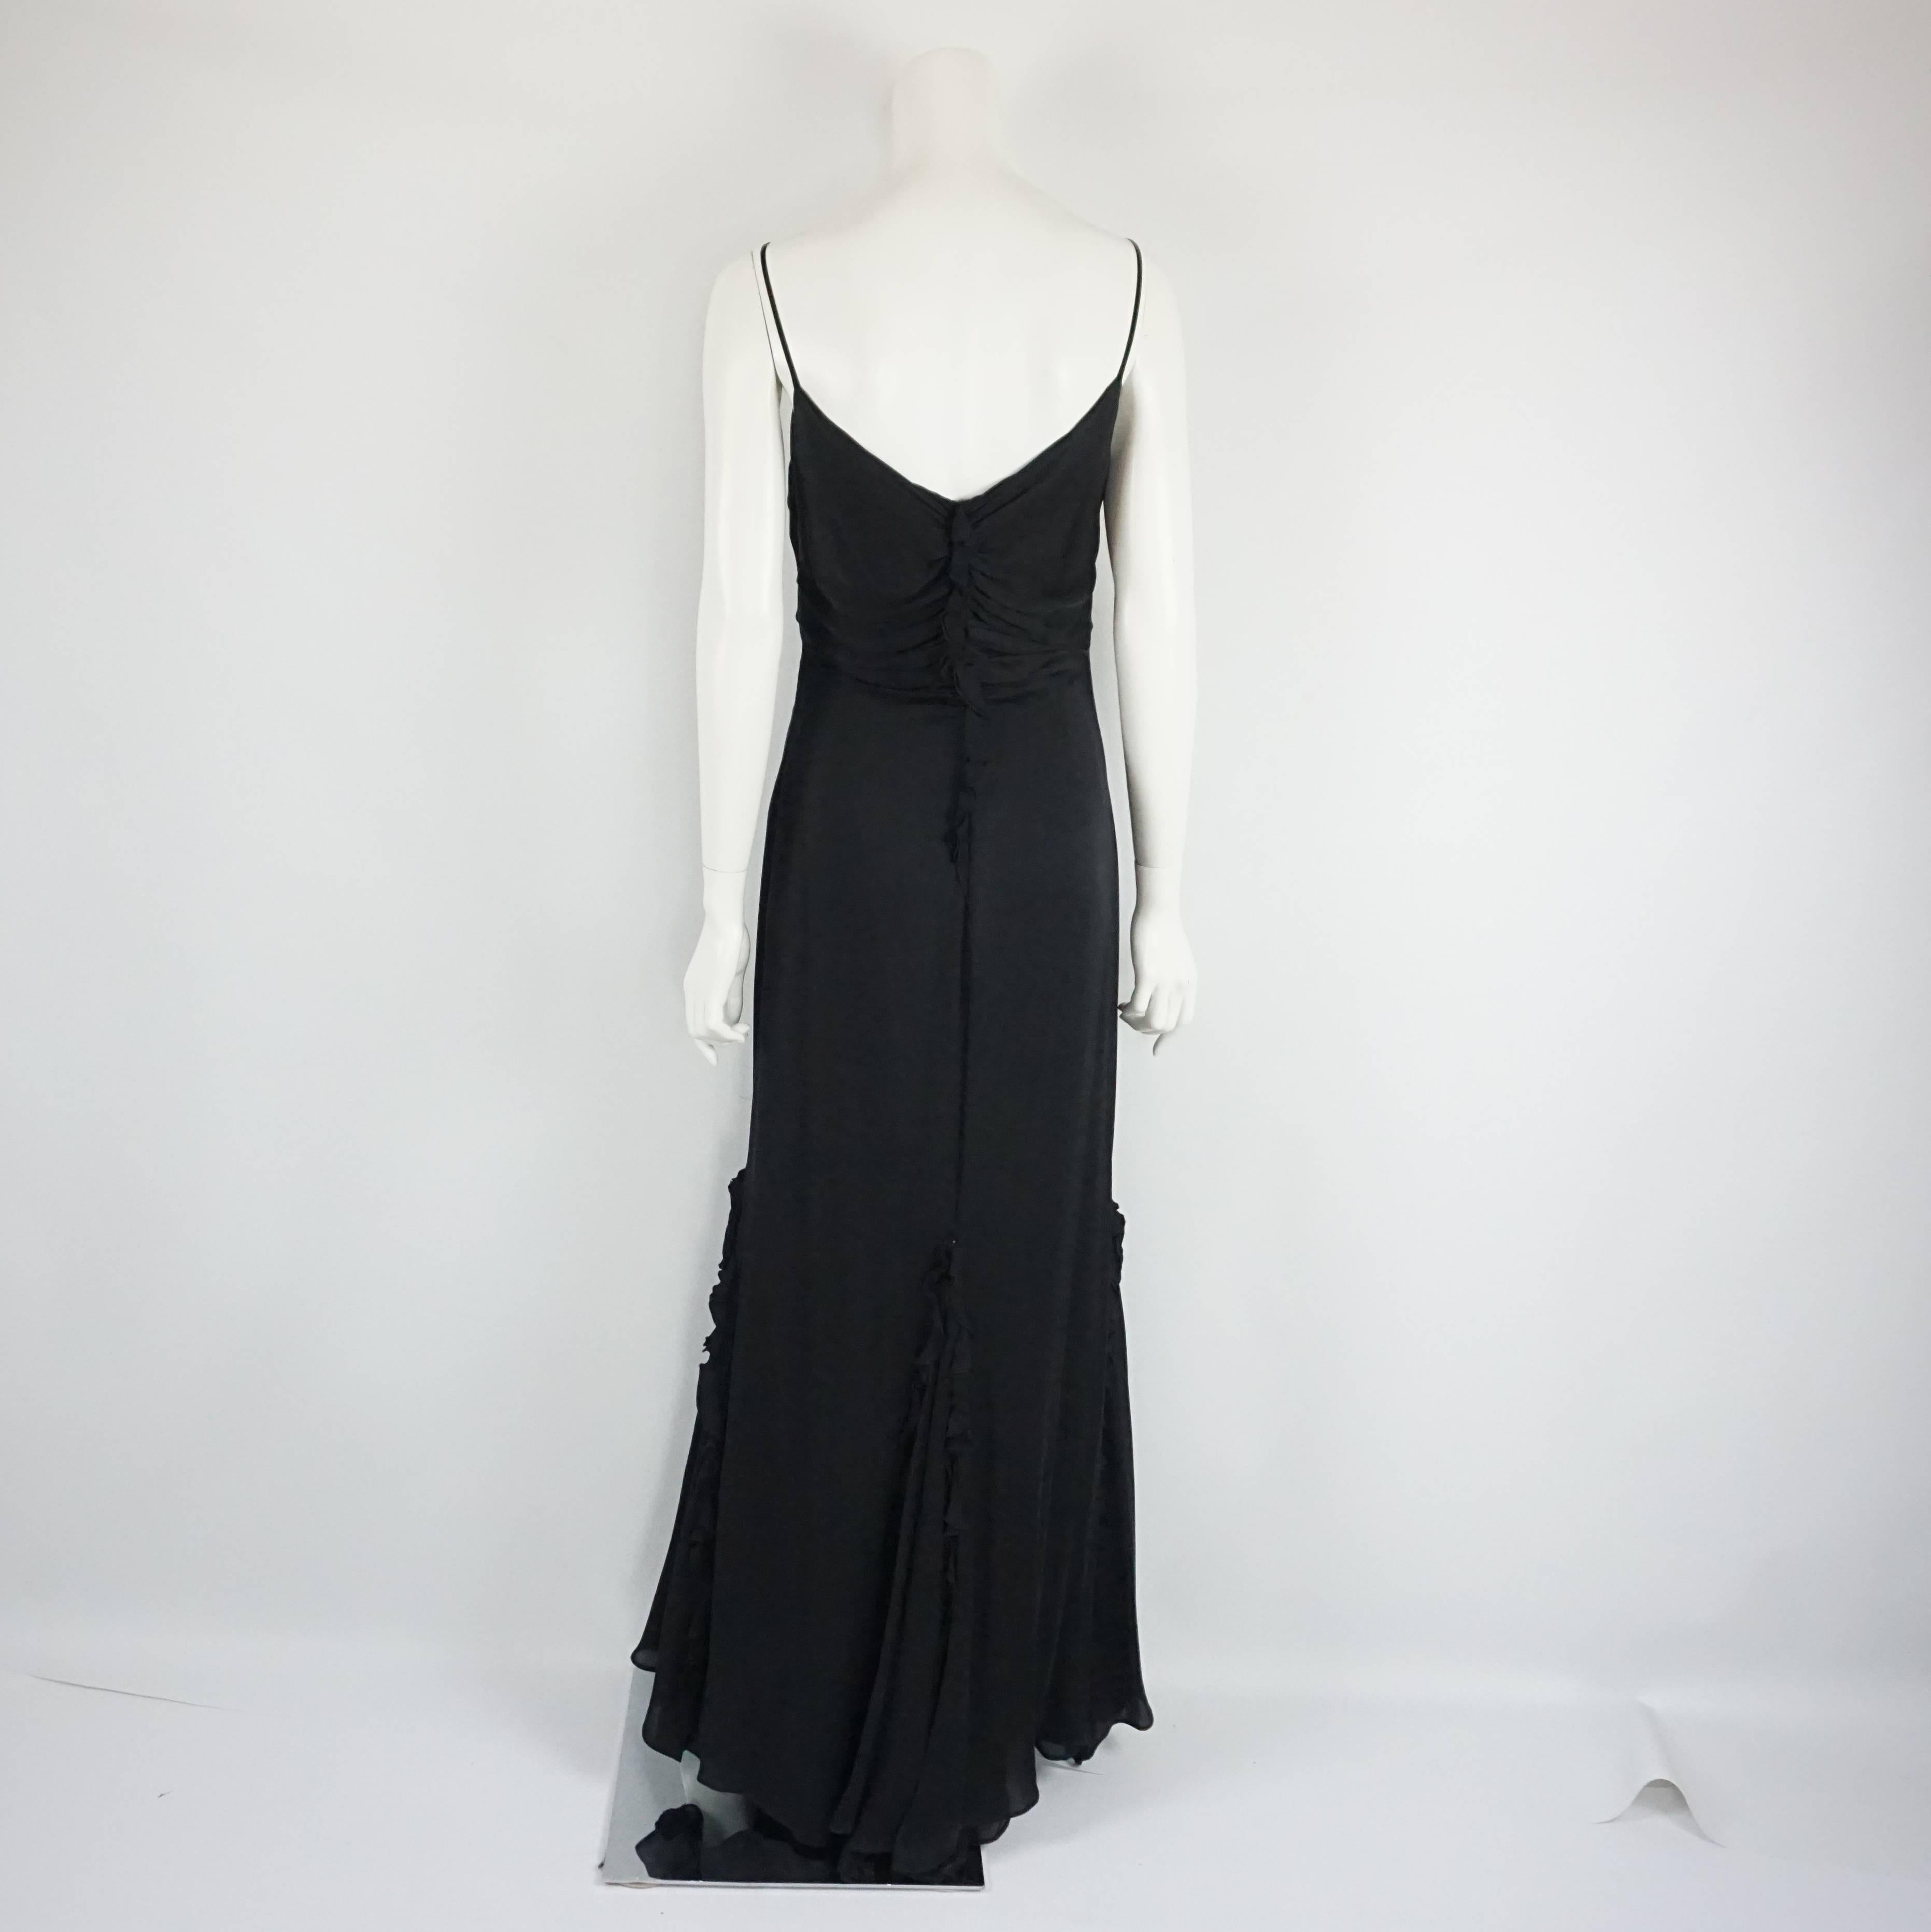 Badgley Mischka Black Jersey Ruched Gown - 10 In Good Condition For Sale In West Palm Beach, FL